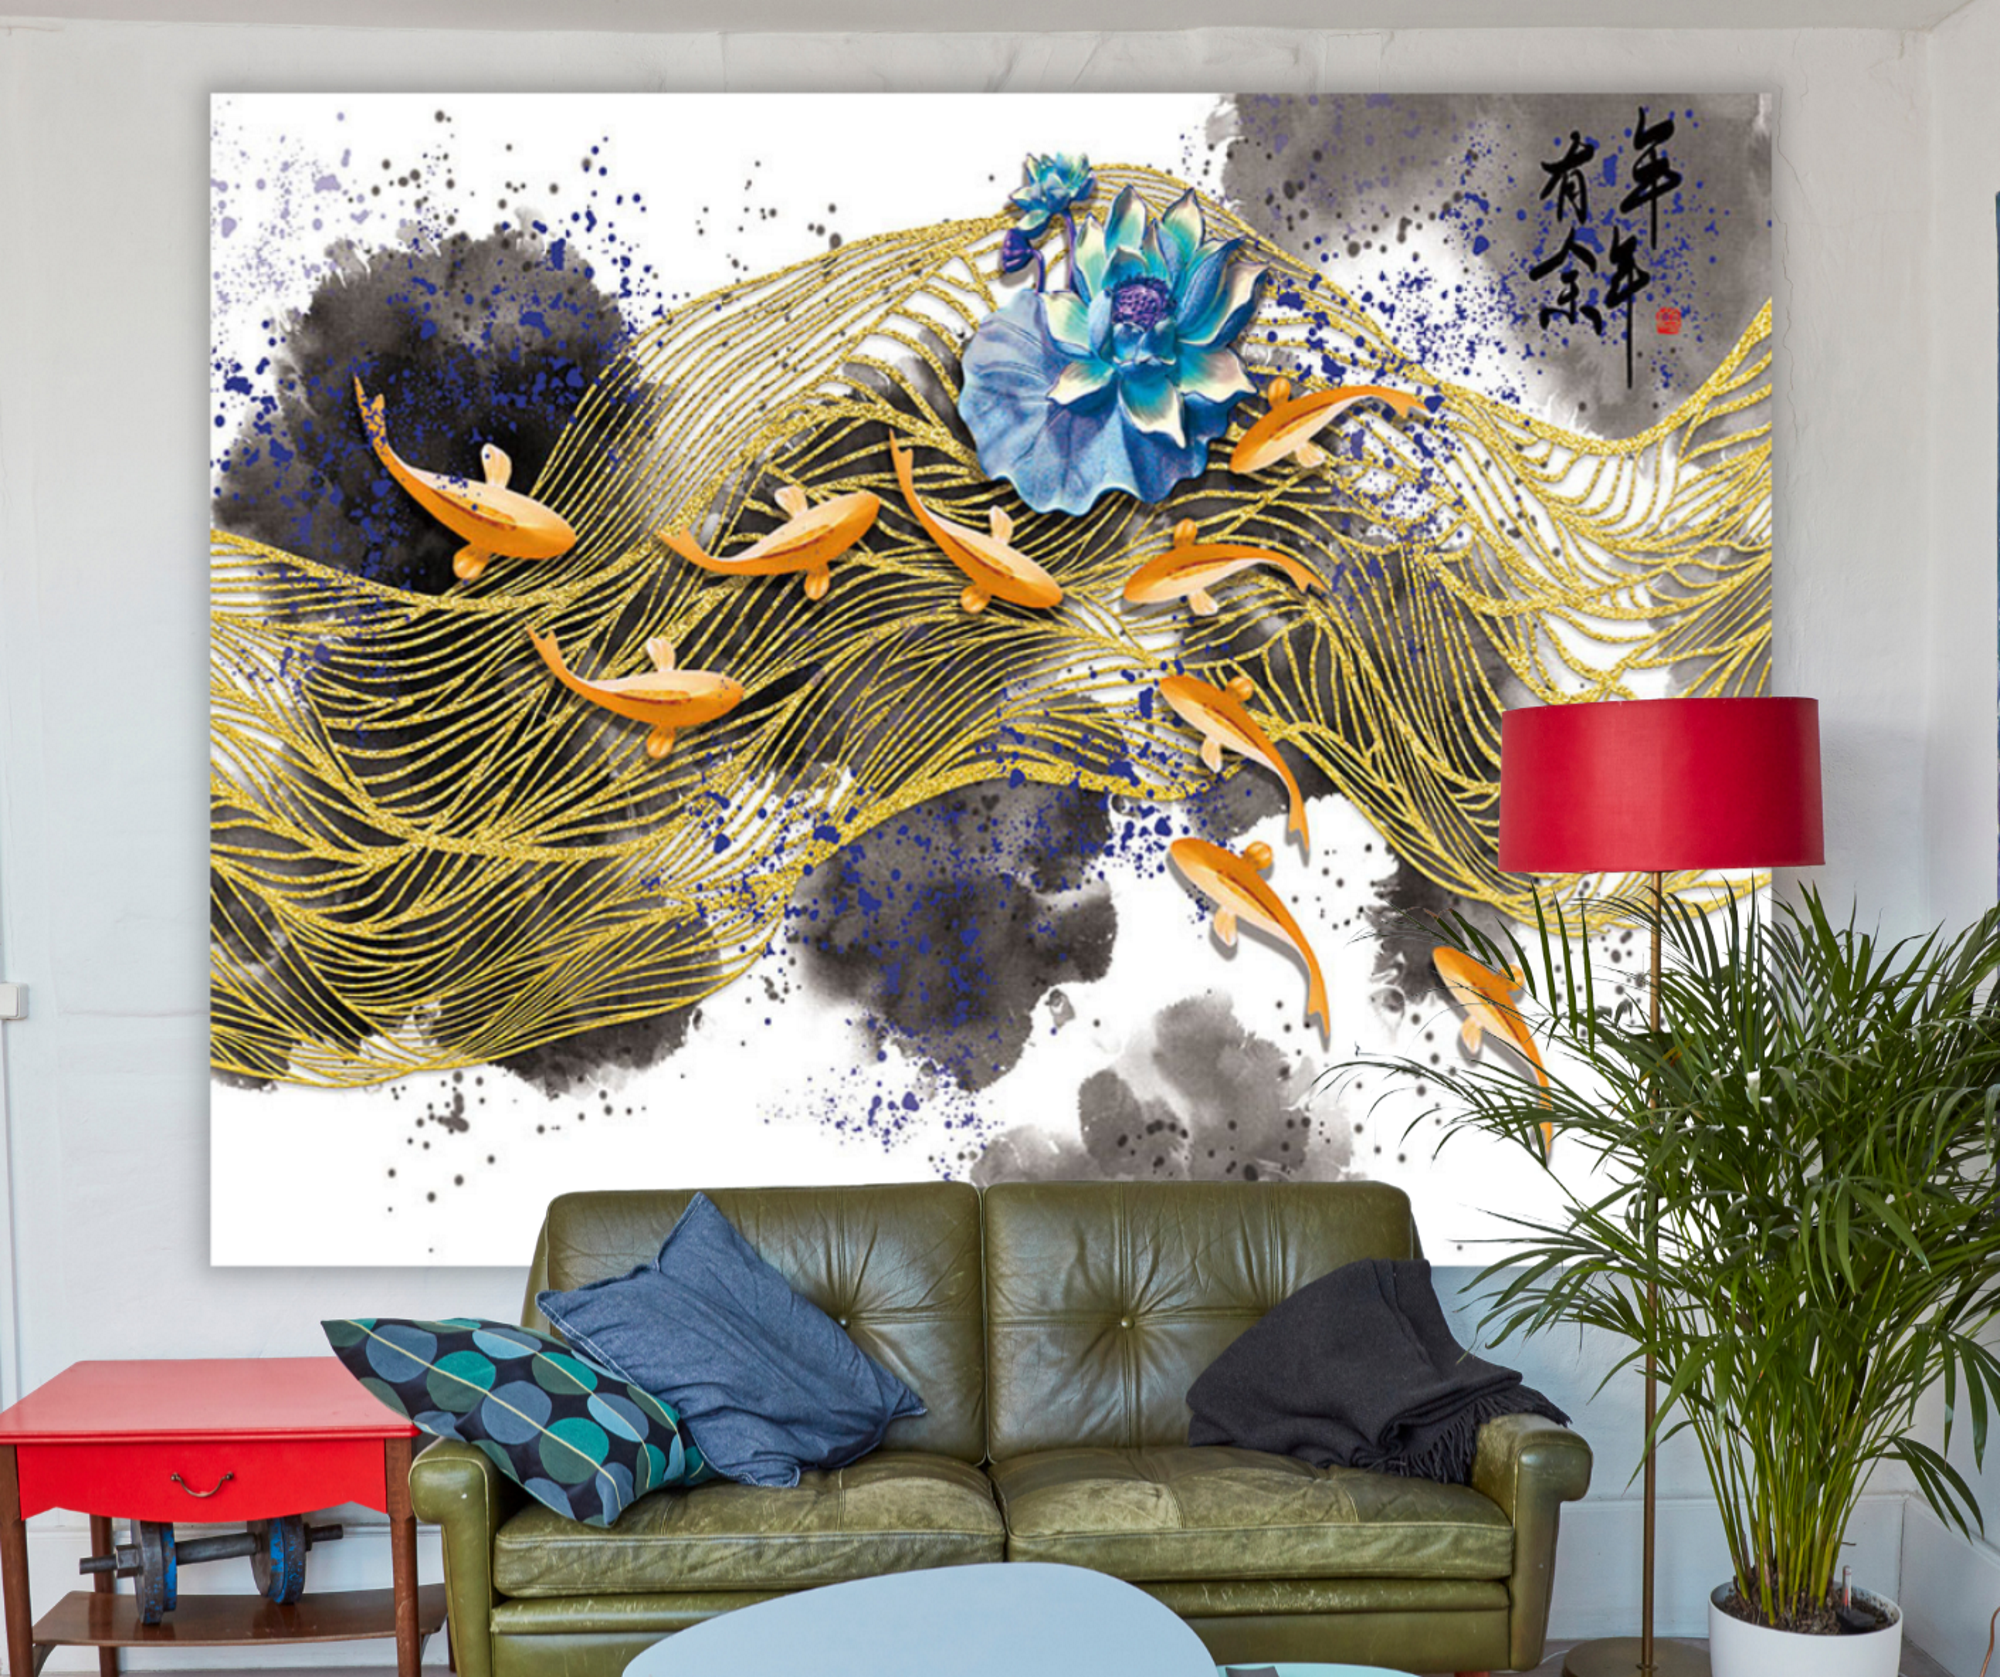 KaiSha LED Tapestry Wall Hanging; Modern Abstract Japanese Art Décor Home Decoration Bedroom Living Room Nature